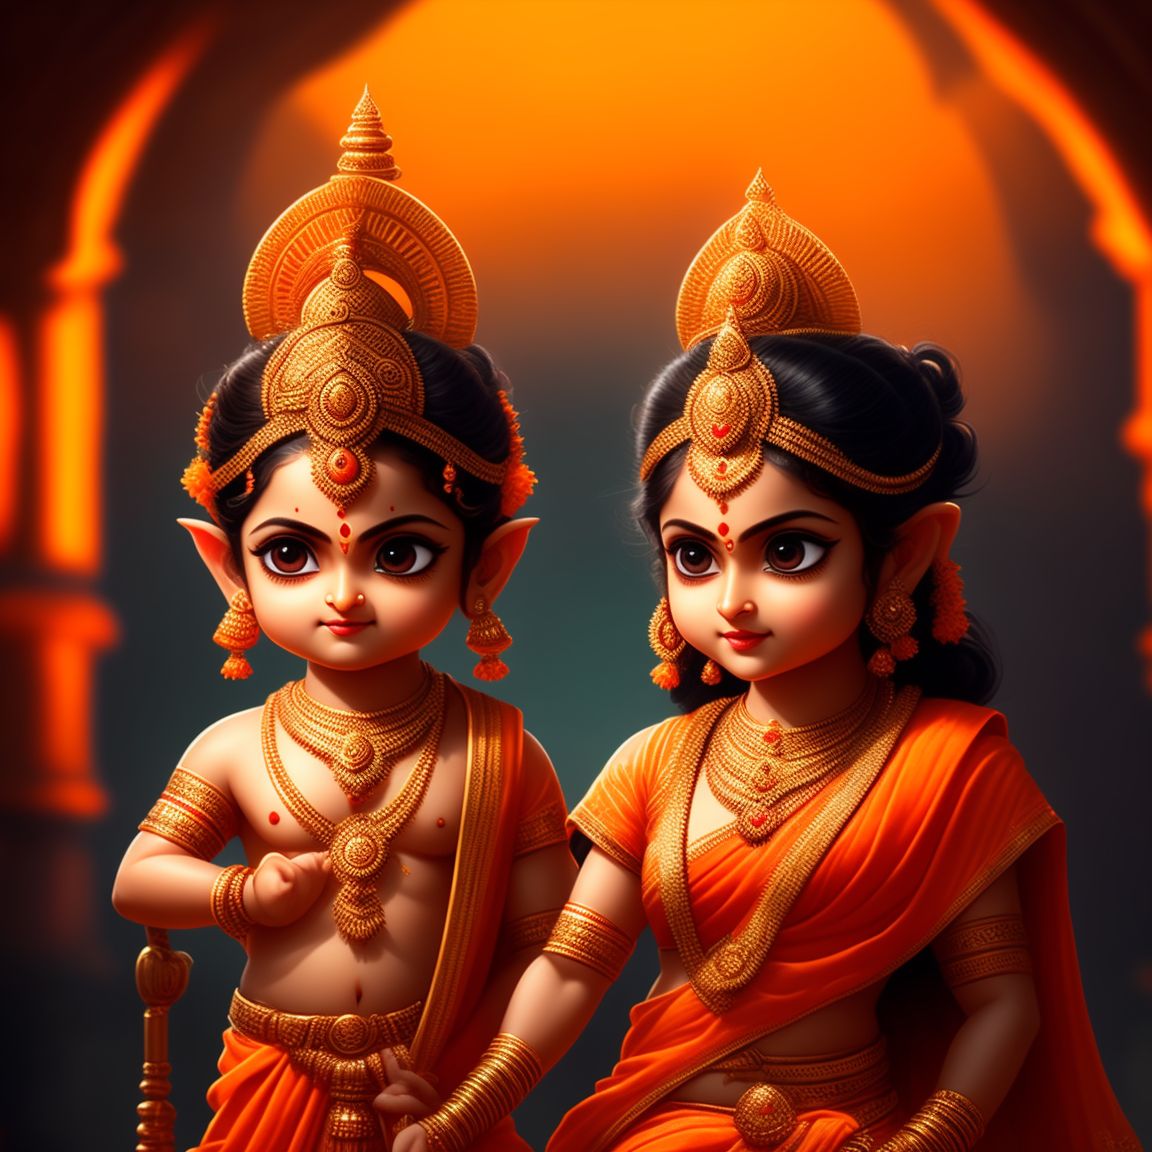 exotic-hare177: Hindu god lord Ram wearing orange clothes with his ...